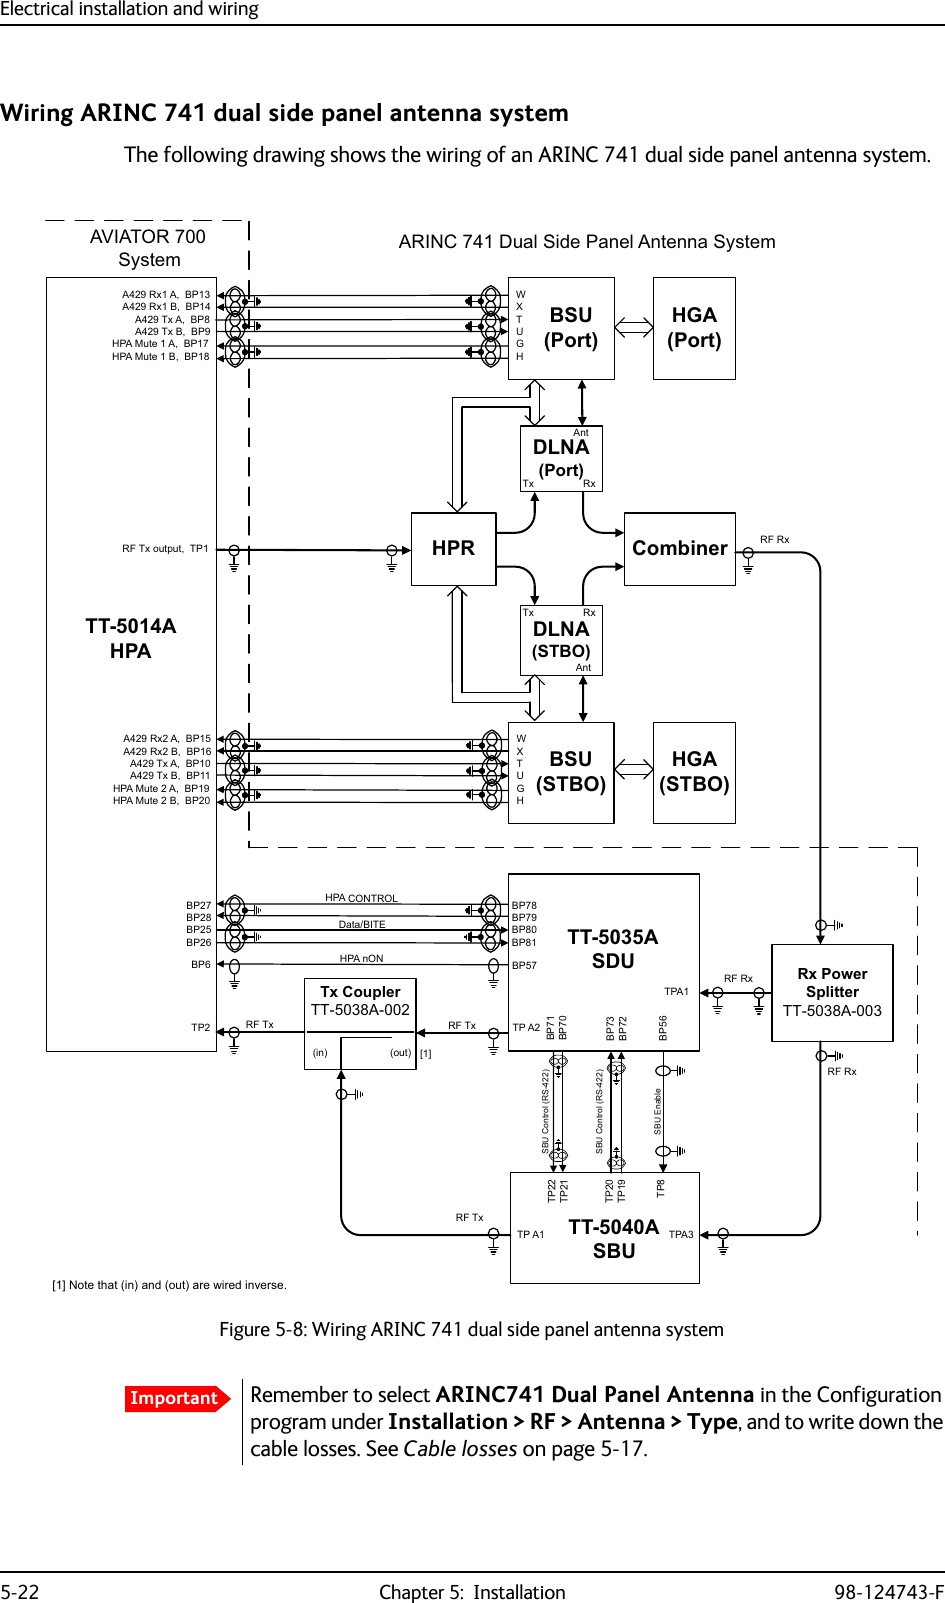 Electrical installation and wiring5-22 Chapter 5:  Installation 98-124743-FWiring ARINC 741 dual side panel antenna systemThe following drawing shows the wiring of an ARINC 741 dual side panel antenna system.Figure 5-8: Wiring ARINC 741 dual side panel antenna system77$+3$$5[$%3$5[%%3$7[$%3$7[%%3+3$0XWH$%3+3$0XWH%%3%6867%2$5[$%3$5[%%3$7[$%3$7[%%3+3$0XWH$%3+3$0XWH%%3%683RUW:;78*+:;78*+&apos;/1$3RUW$QW+357[ 5[&apos;/1$67%2$QW7[ 5[5)7[RXWSXW73+*$3RUW+*$67%277$6&apos;873$$9,$7256\VWHP%3%3%3%3+3$Q21%3 %3%3%3%3%3+3$&amp;21752/&apos;DWD%,7(73$73 5)7[5)5[&amp;RPELQHU$5,1&amp;&apos;XDO6LGH3DQHO$QWHQQD6\VWHP77$6%85[3RZHU6SOLWWHU77$7[&amp;RXSOHU77$5)7[5)5[5)5[5)7[6%8&amp;RQWURO5673737373736%8&amp;RQWURO566%8(QDEOH%3%3%3%3%3&gt;@1RWHWKDWLQDQGRXWDUHZLUHGLQYHUVHLQ RXW &gt;@73$73$ImportantRemember to select ARINC741 Dual Panel Antenna in the Configuration program under Installation &gt; RF &gt; Antenna &gt; Type, and to write down the cable losses. See Cable losses on page 5-17.